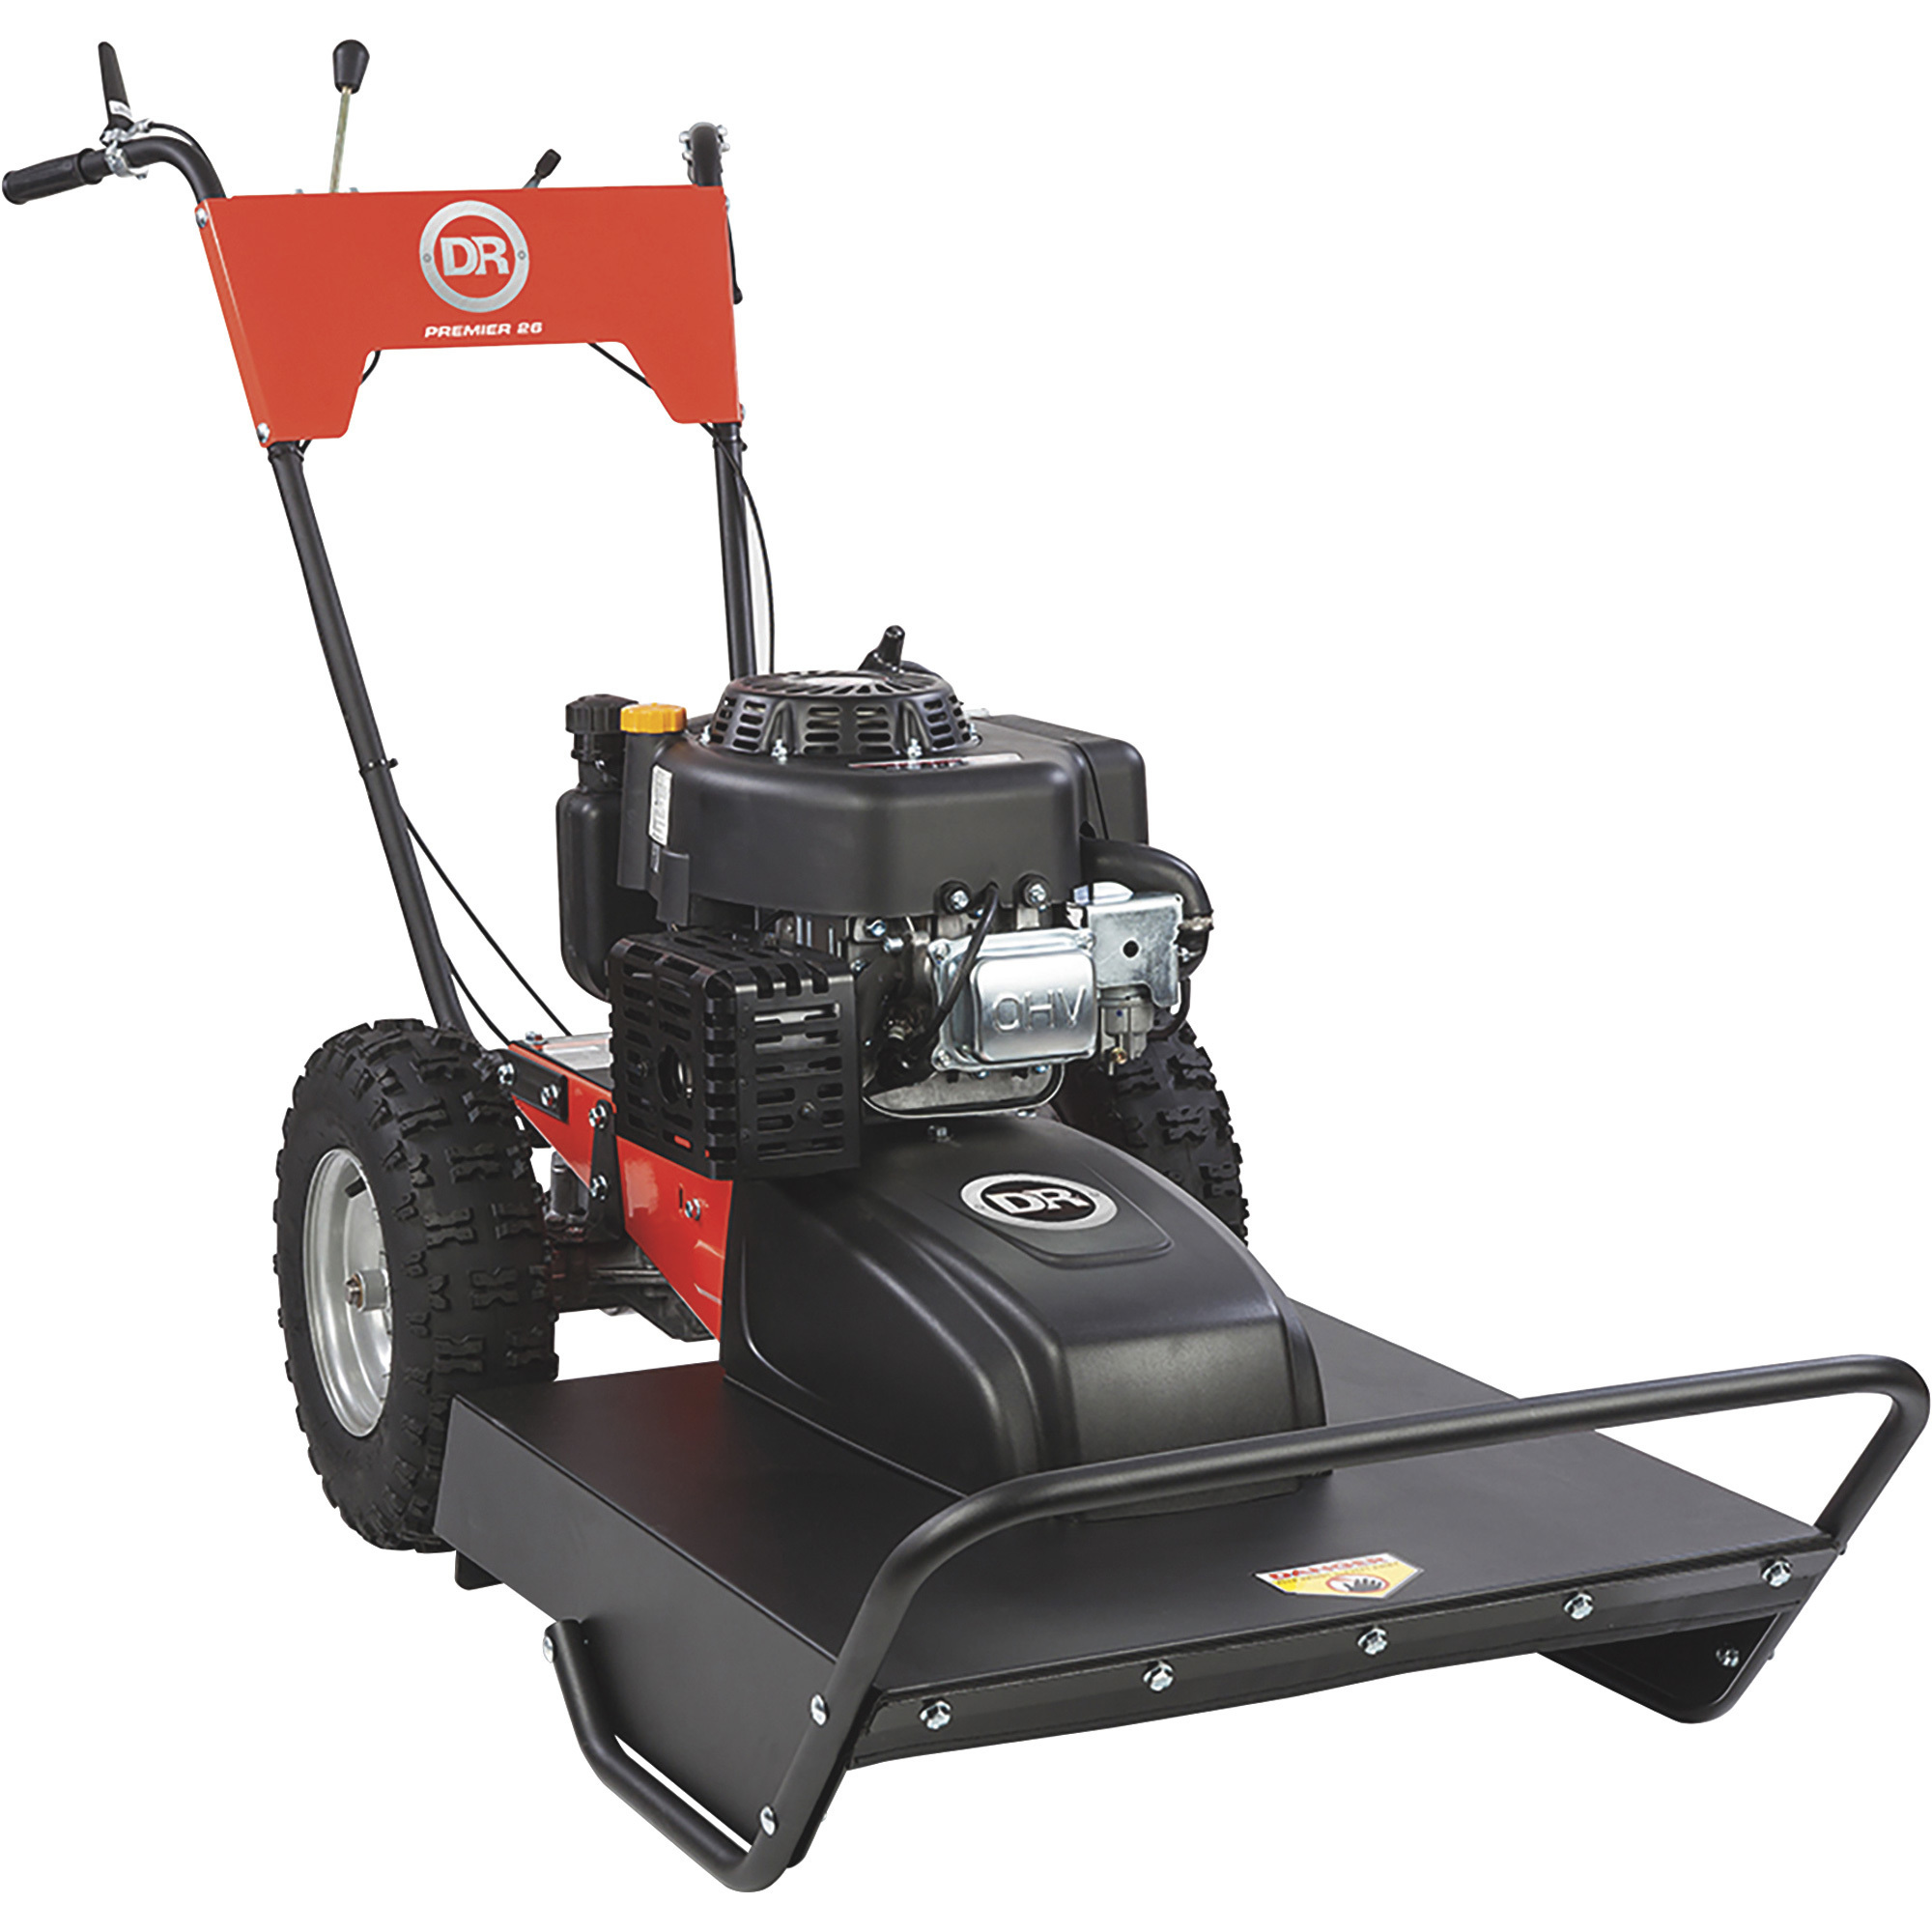 DR Power PREMIER Field and Brush Mower, 10.5 HP, 26Inch Deck, Model AT41026BMN